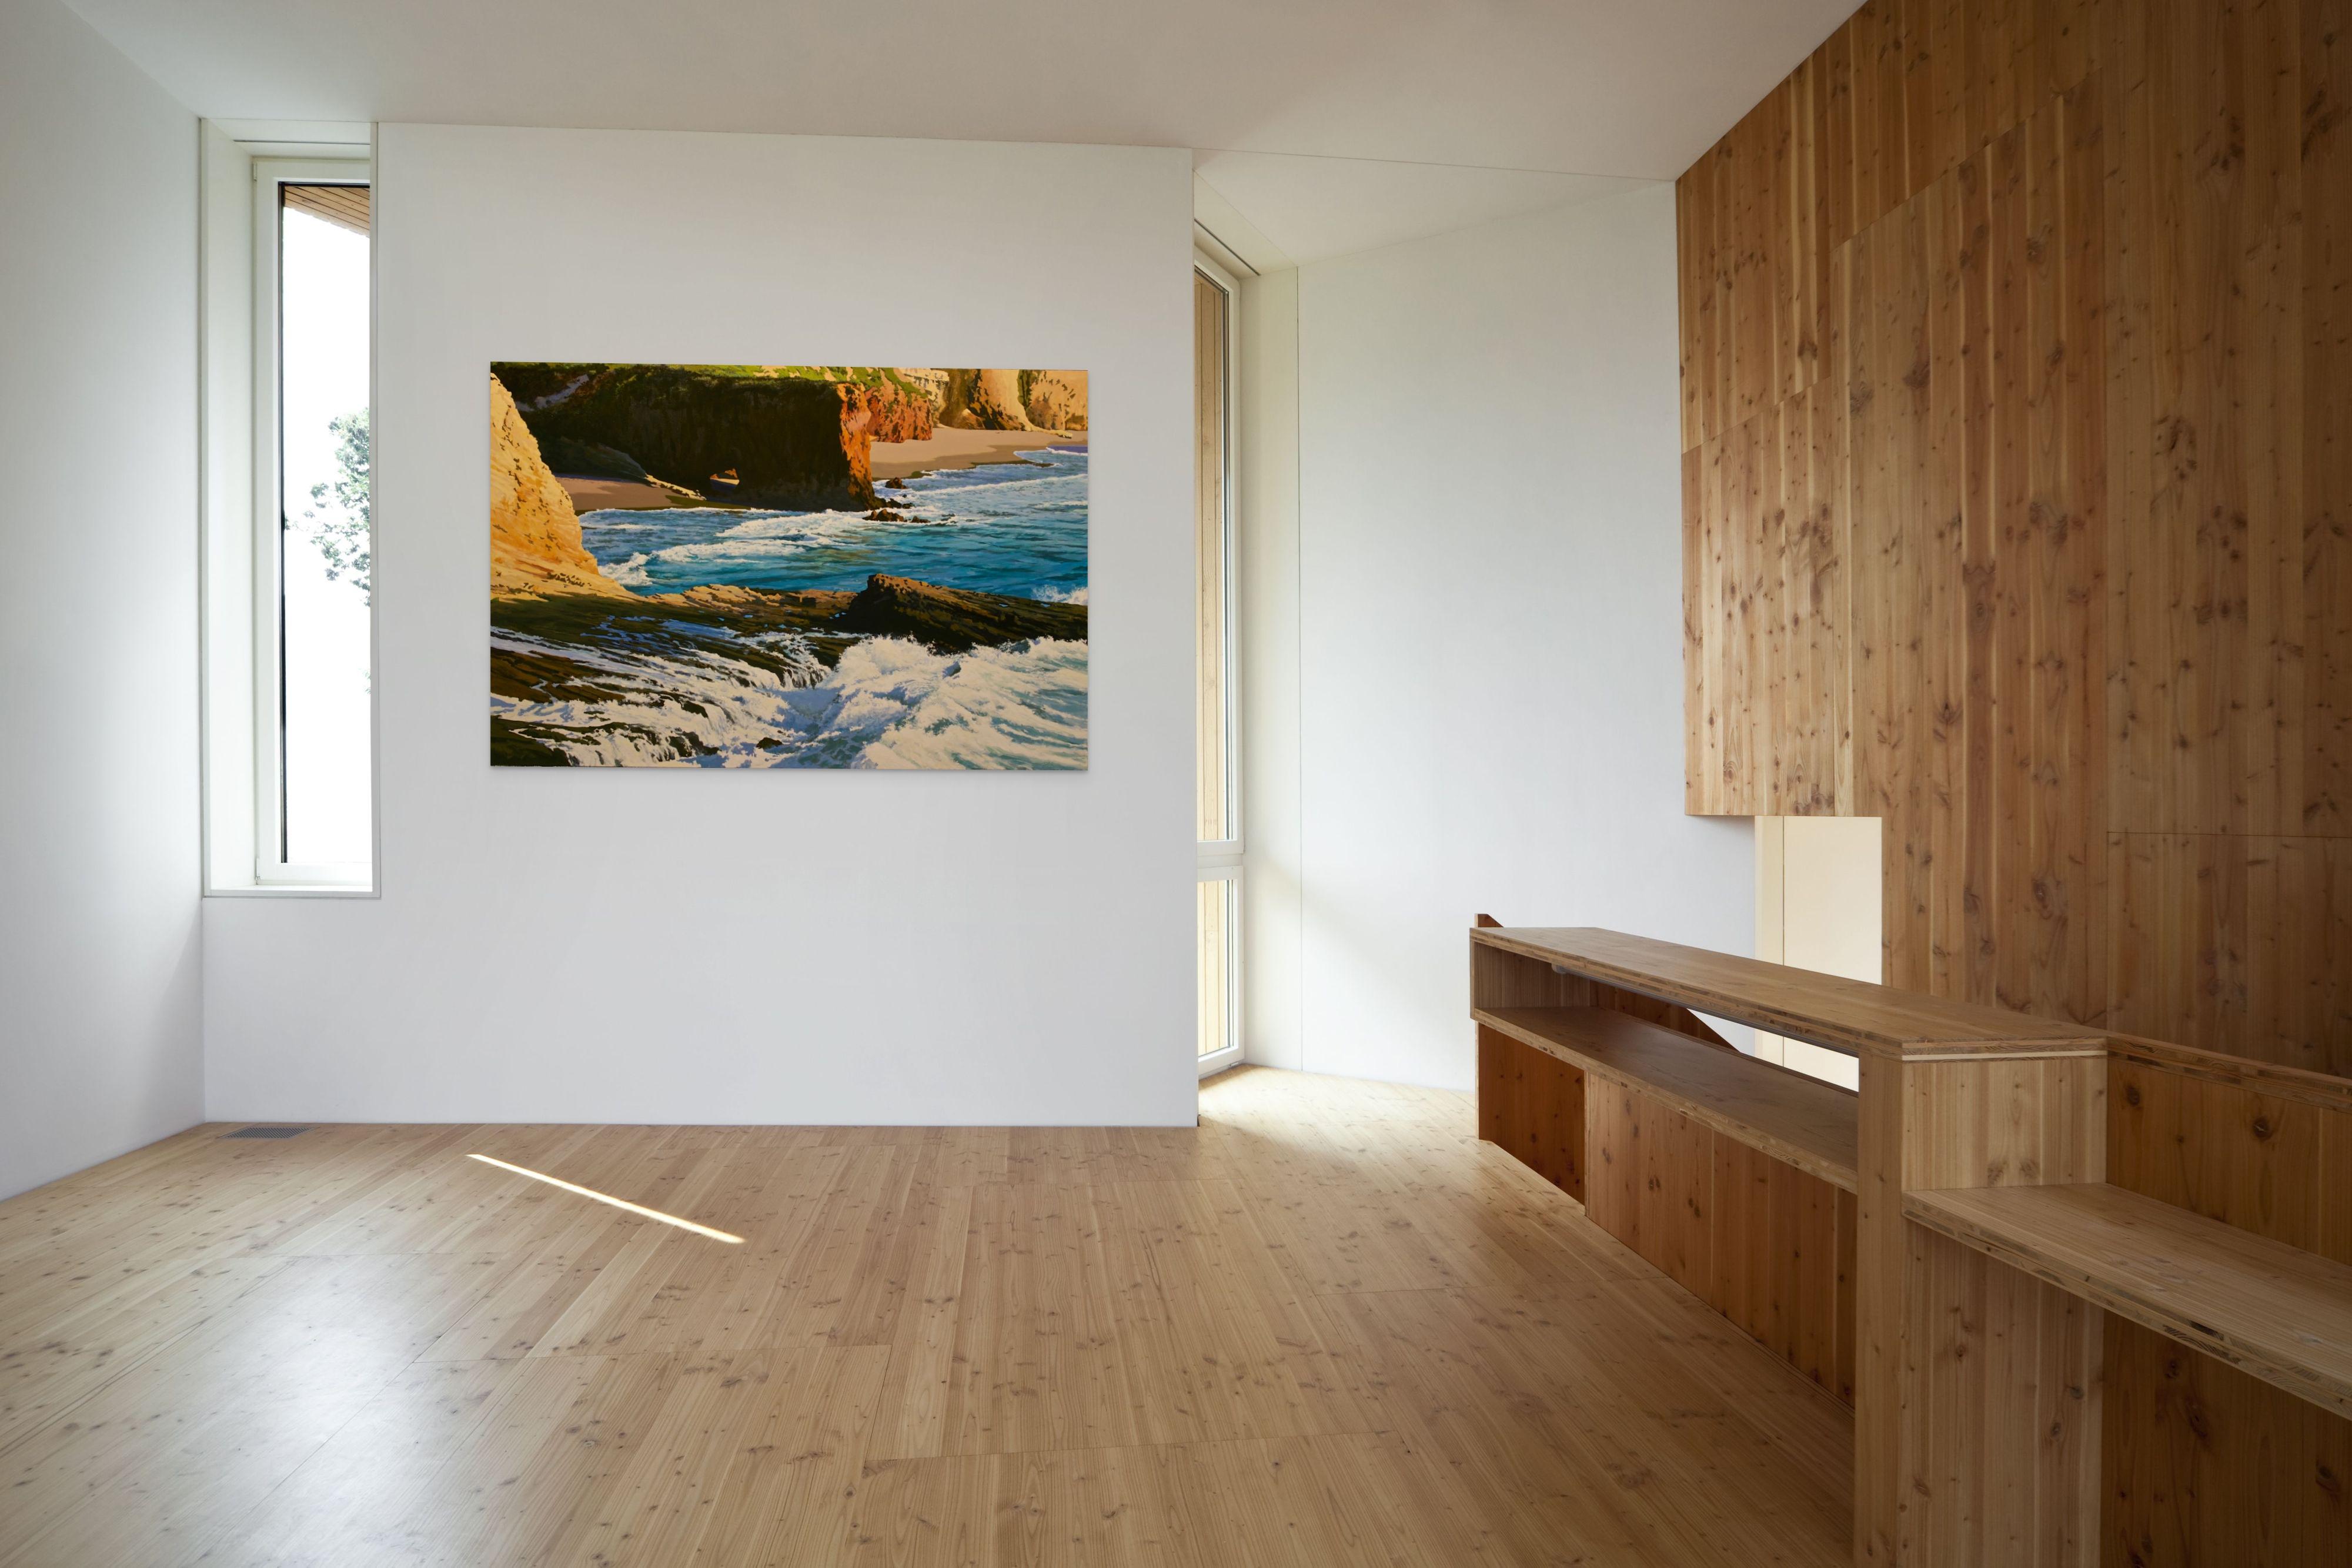 Eventide at Hole-in-the Wall /  44 x 66 in. oil on canvas nature painting - Painting by Peter Loftus